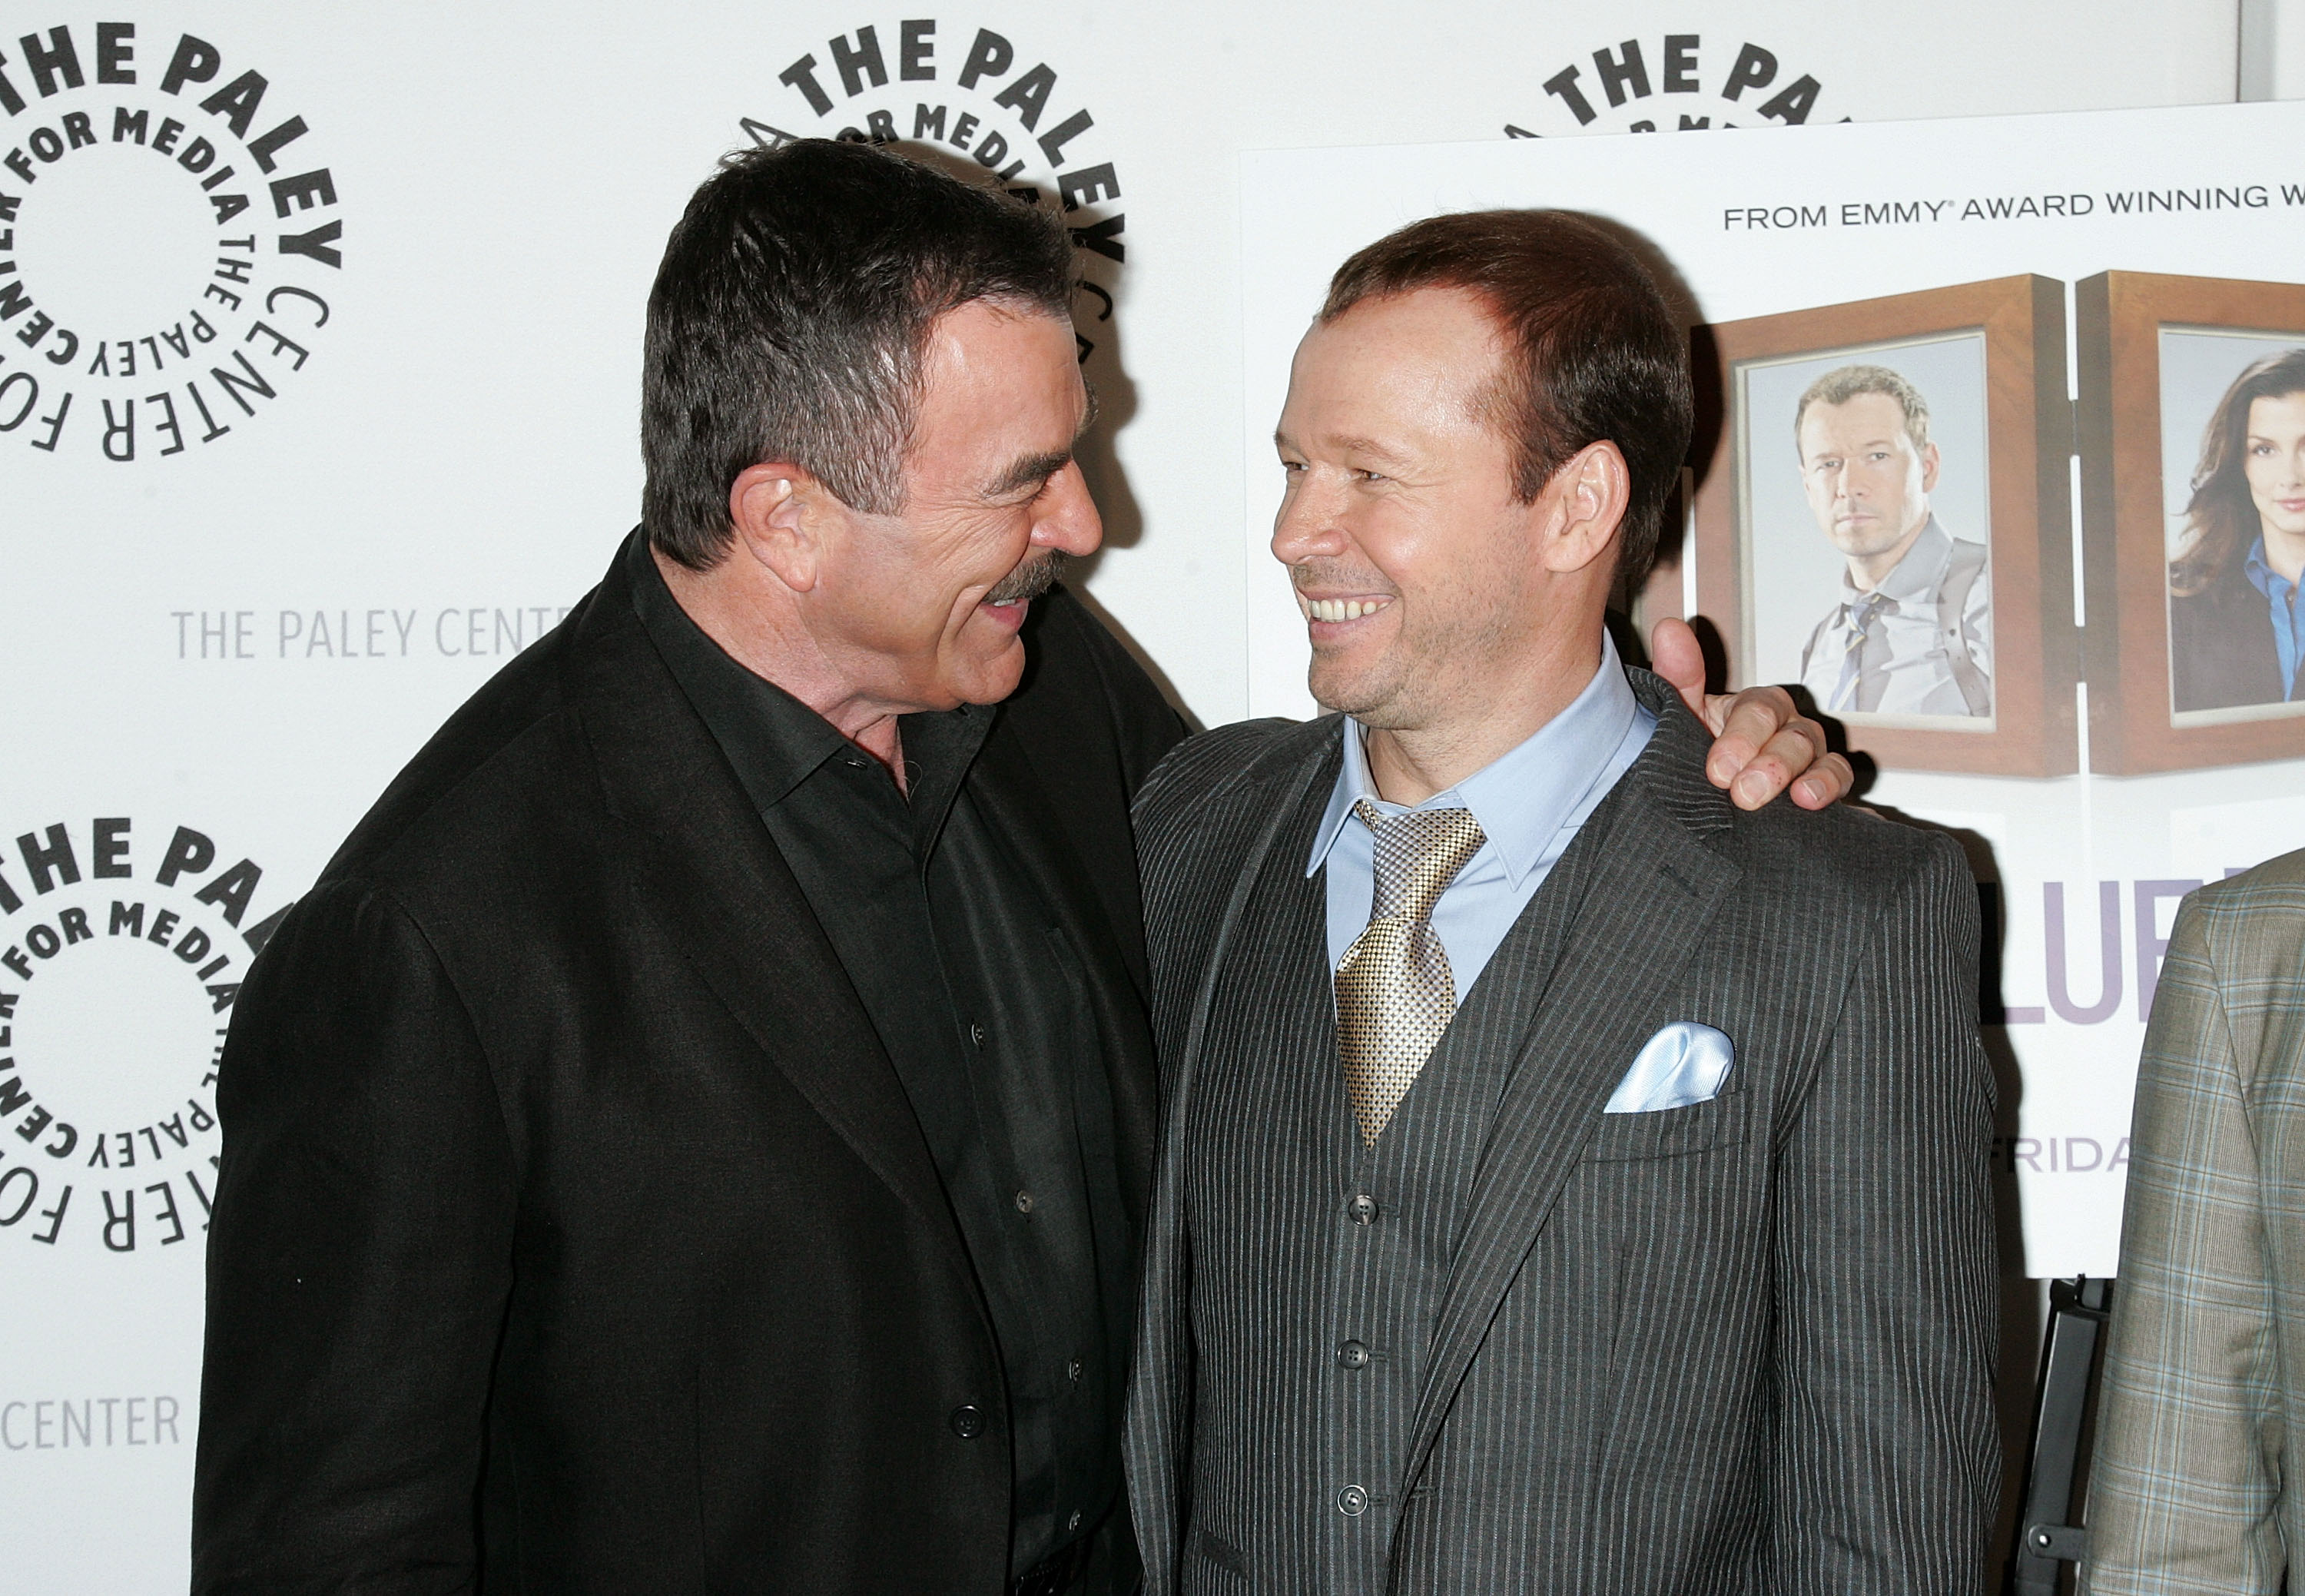 Tom Selleck and Donnie Wahlberg in New York City, New York on September 22, 2010 | Source: Getty Images